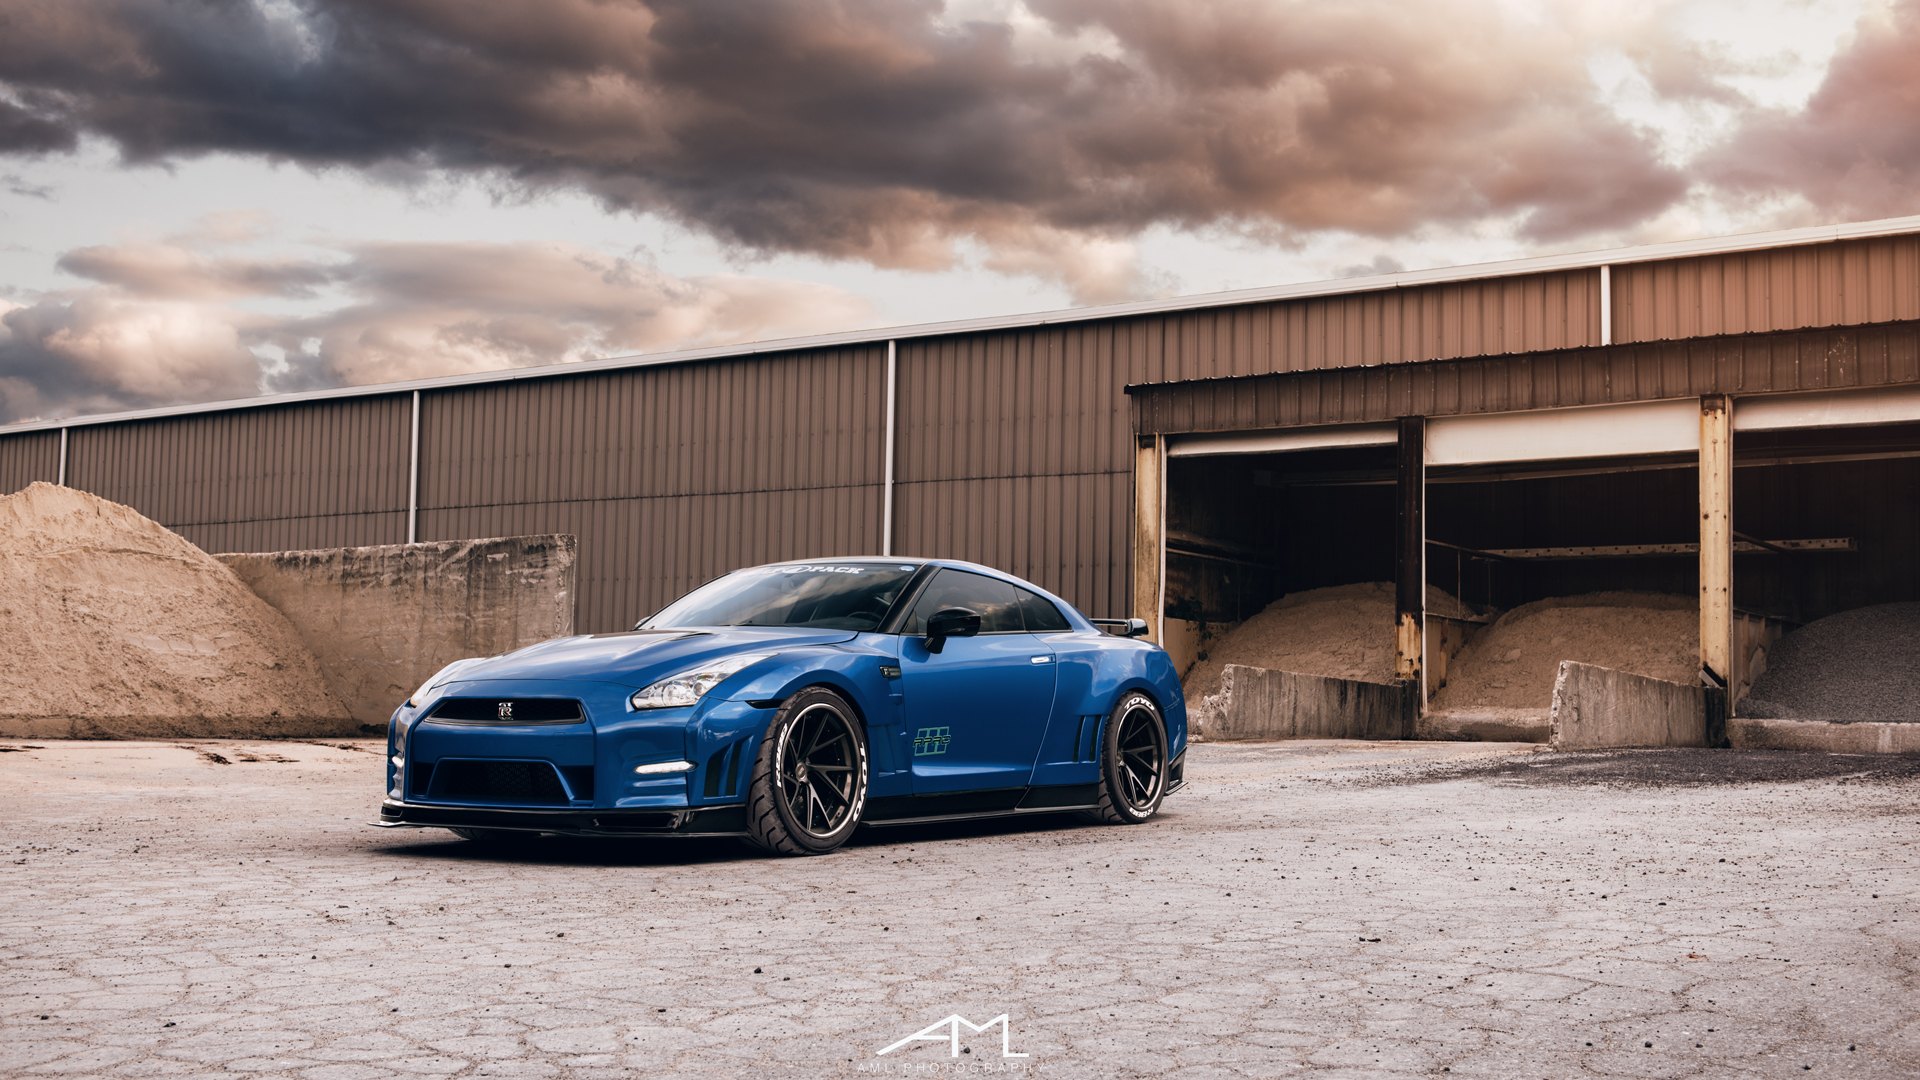 Blue Nissan GT-R with Aftermarket Body Kit - Photo by Arlen Liverman